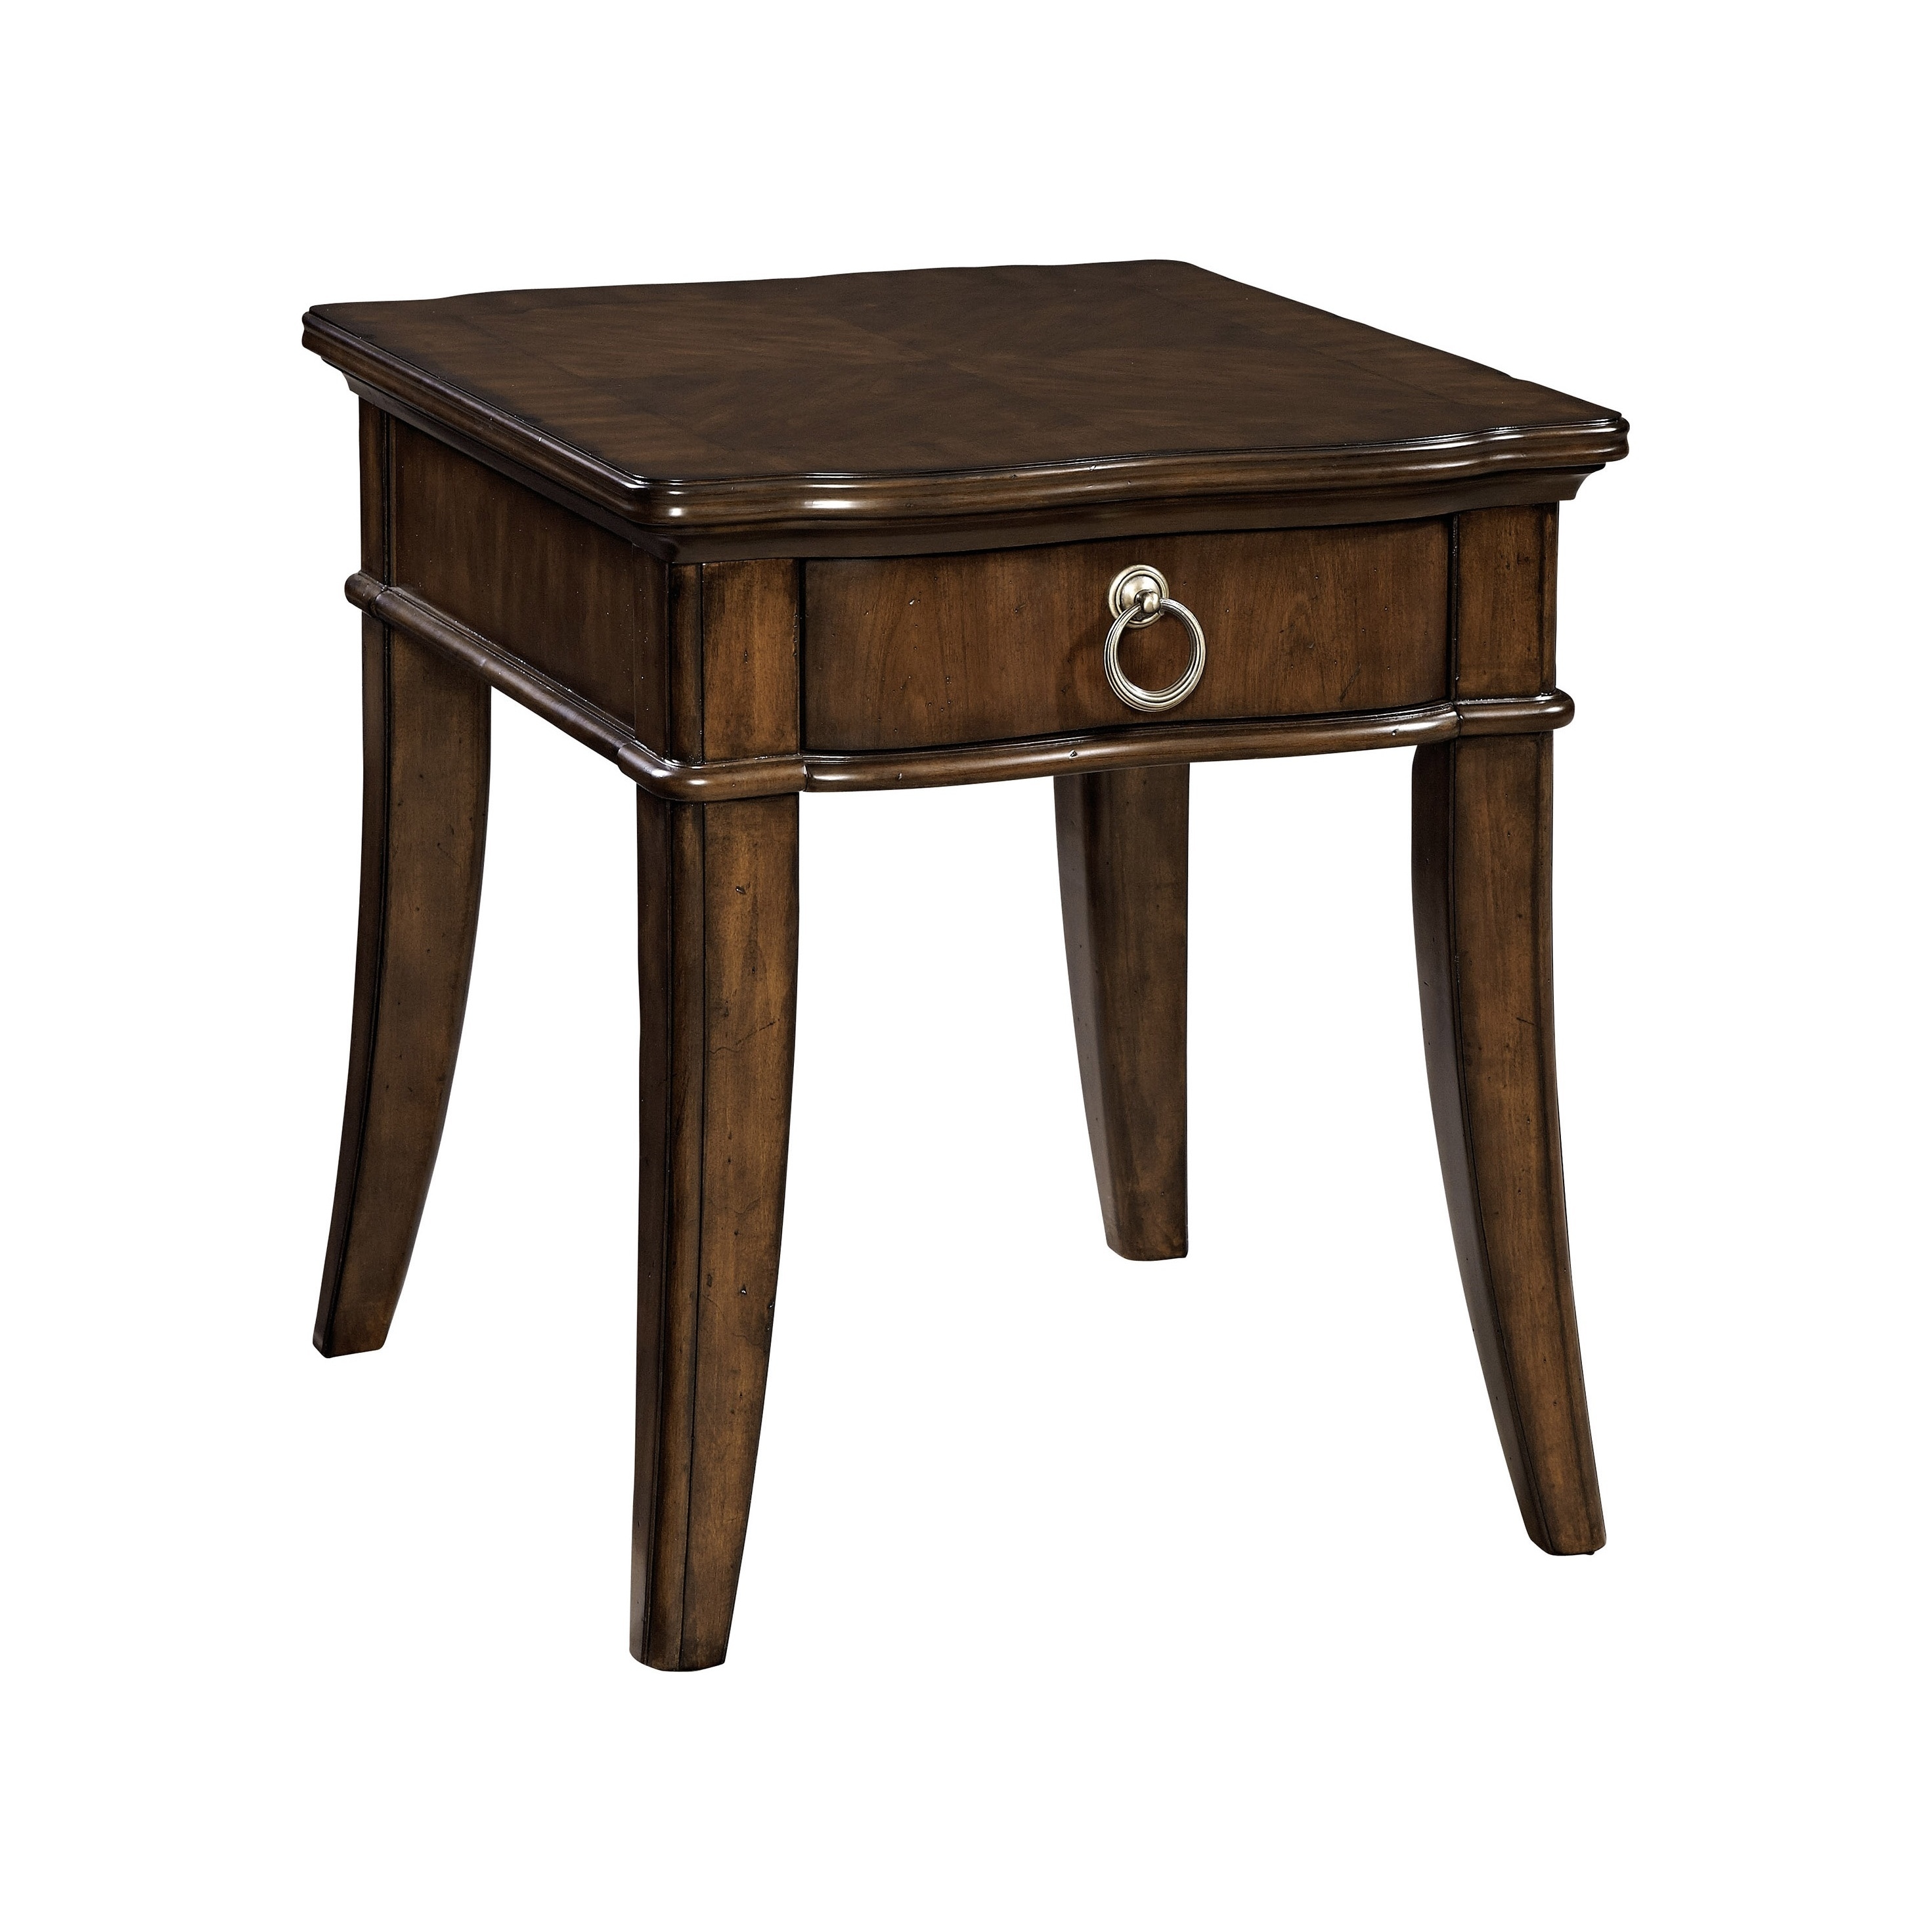 Broyhill Elaina Cherry Wood Single Drawer End Table Overstock 12309250